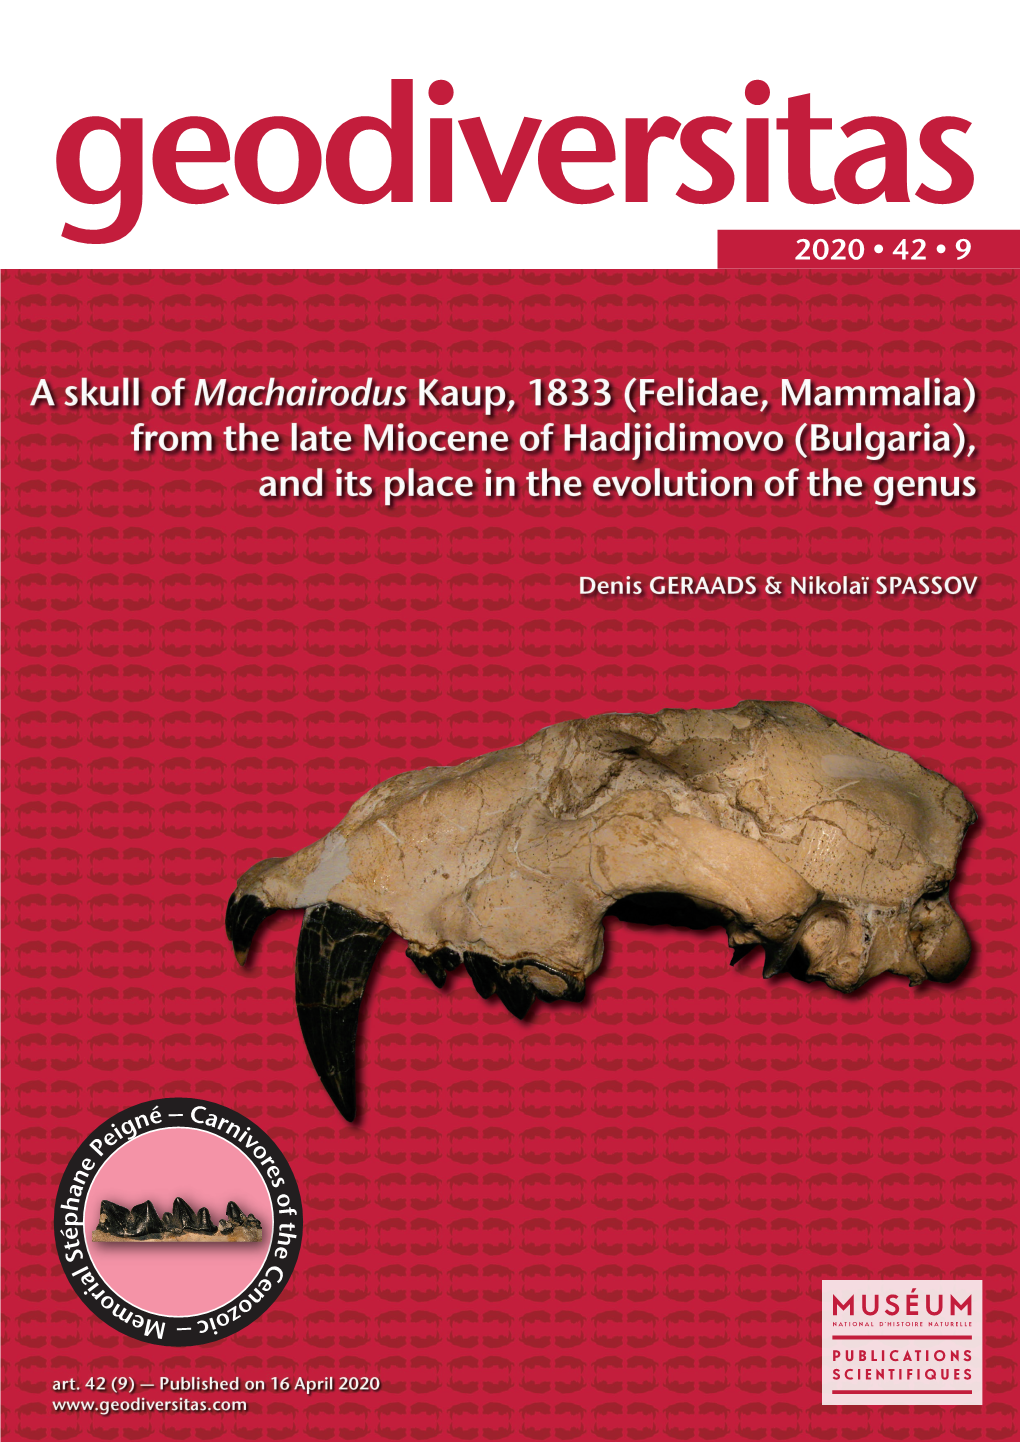 A Skull of Machairodus Kaup, 1833 (Felidae, Mammalia) from the Late Miocene of Hadjidimovo (Bulgaria), and Its Place in the Evolution of the Genus